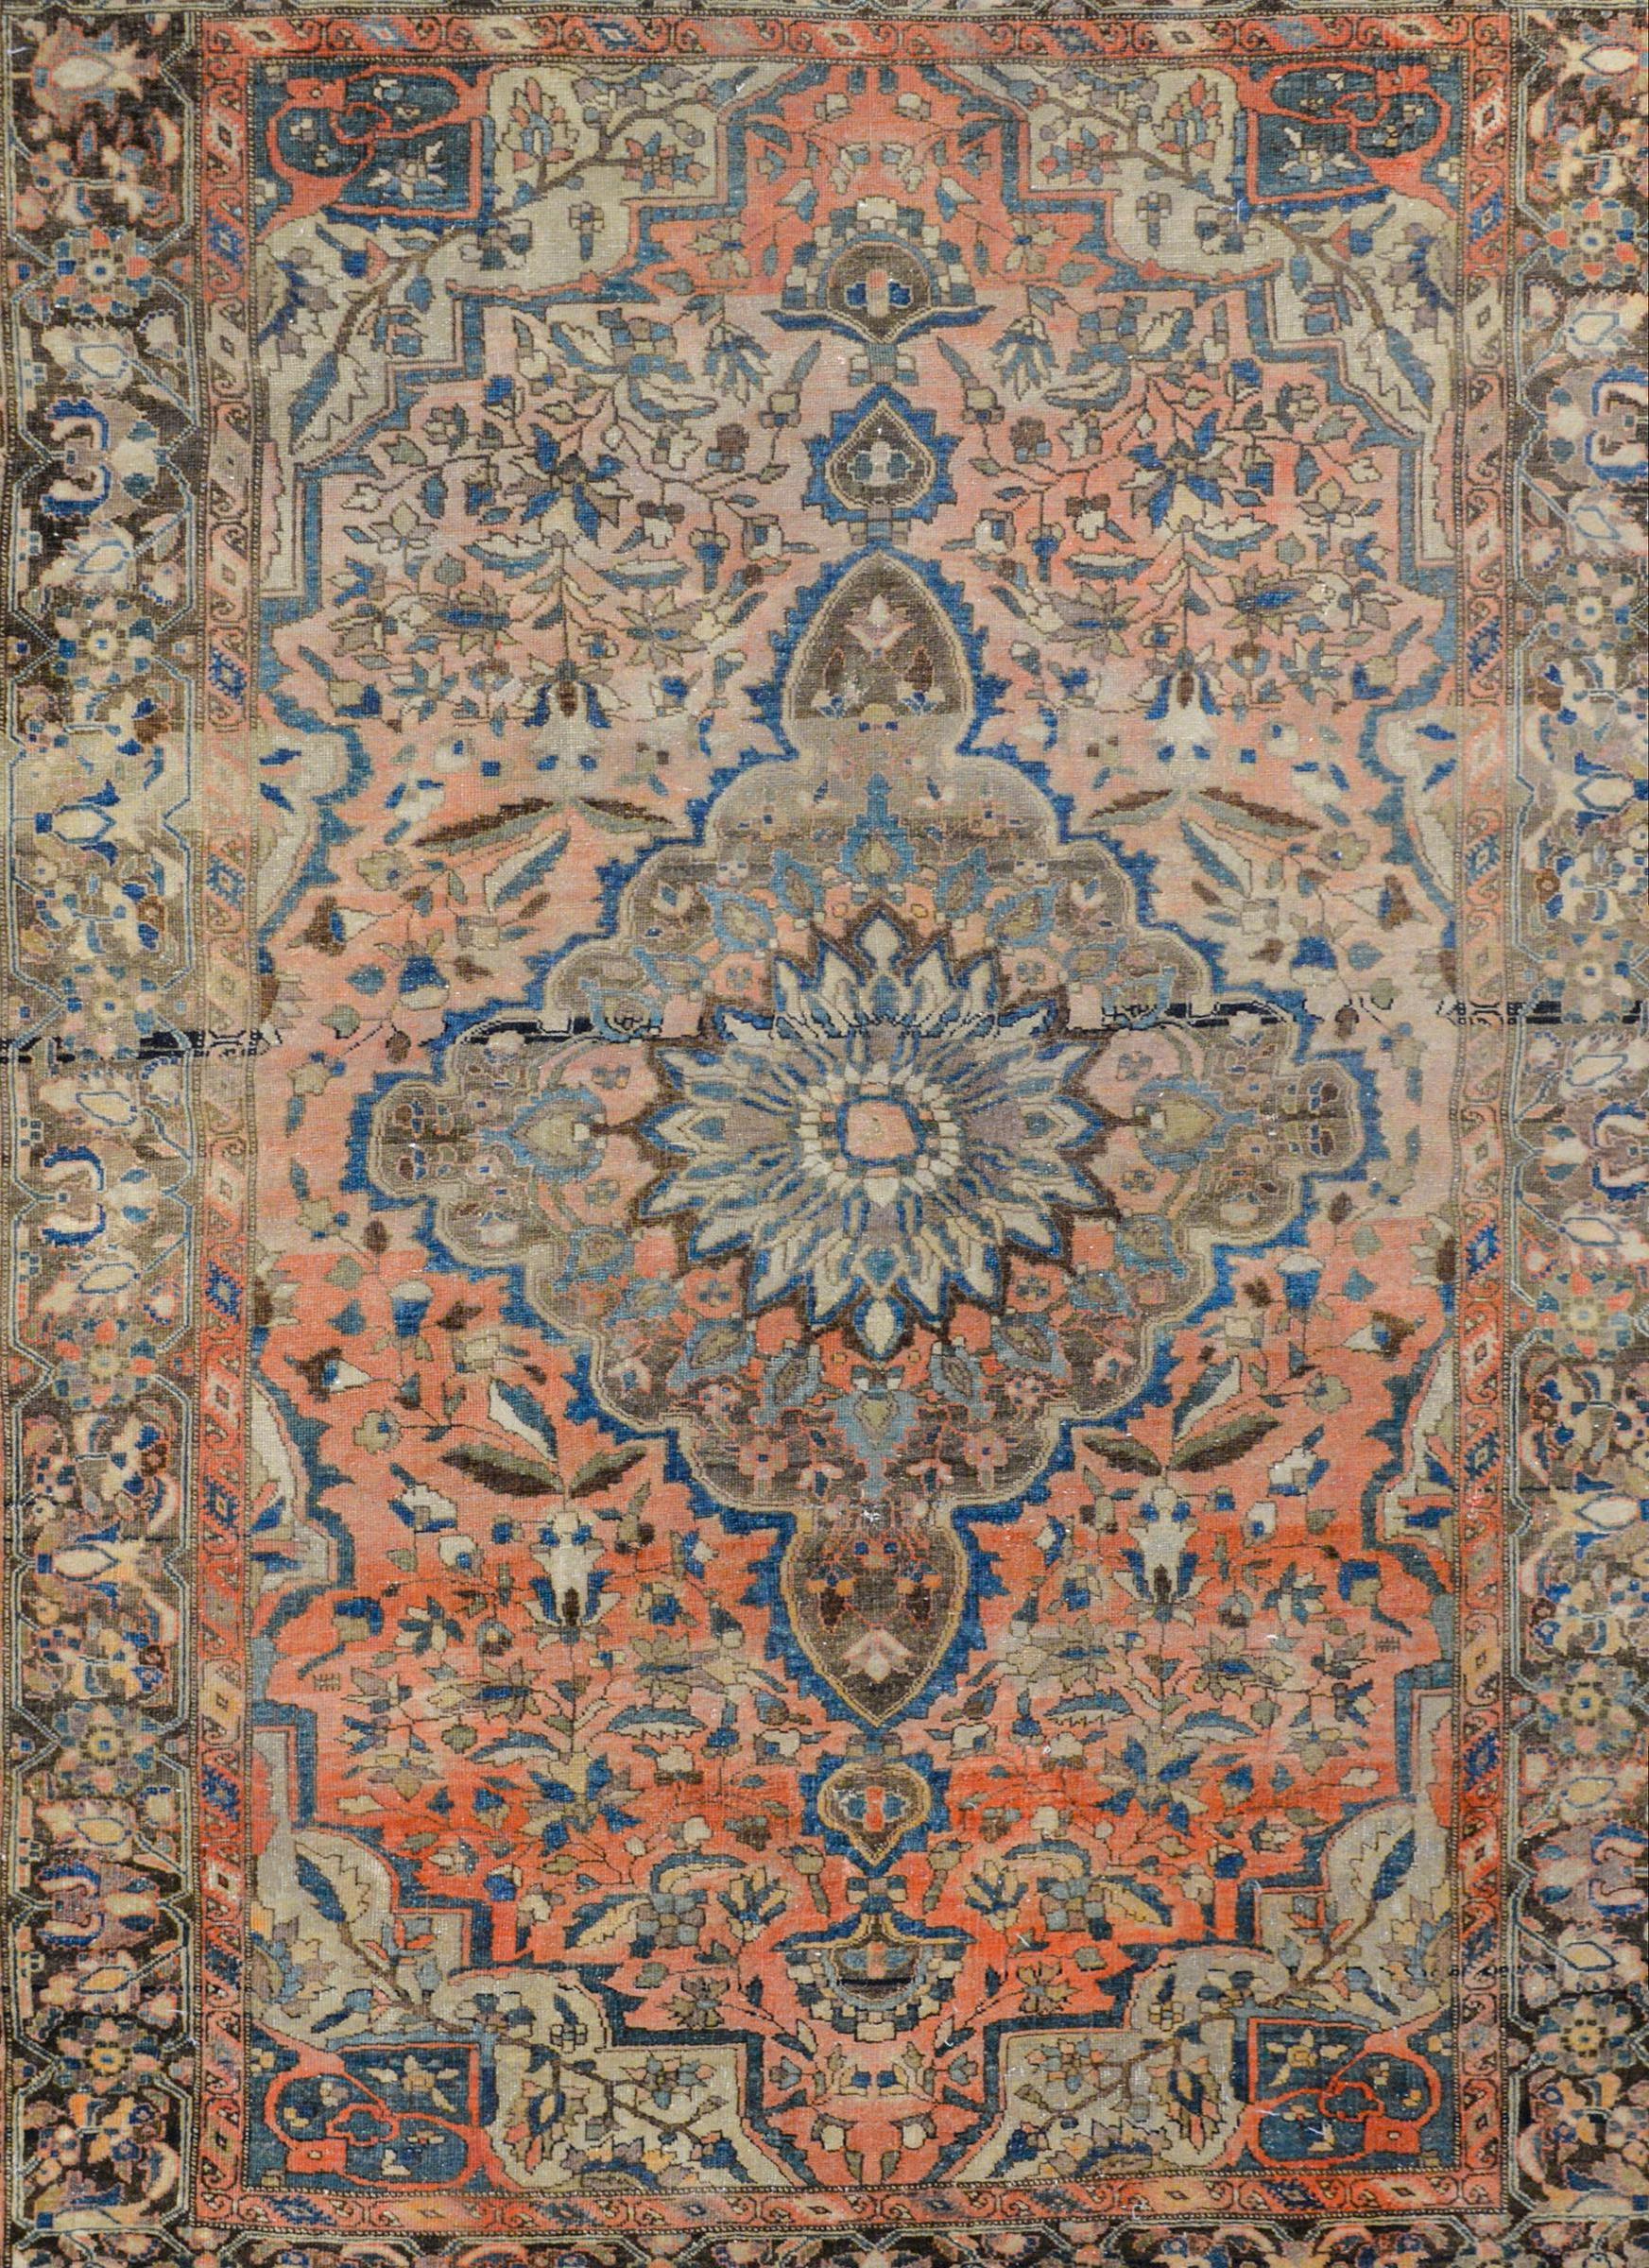 An extraordinary early 20th century Sarouk Farahan rug with a large central floral medallion woven in light and dark indigo, cream, pale green, and brown colored vegetable dyed wool, all on an abrash coral background. The border is fascinating with